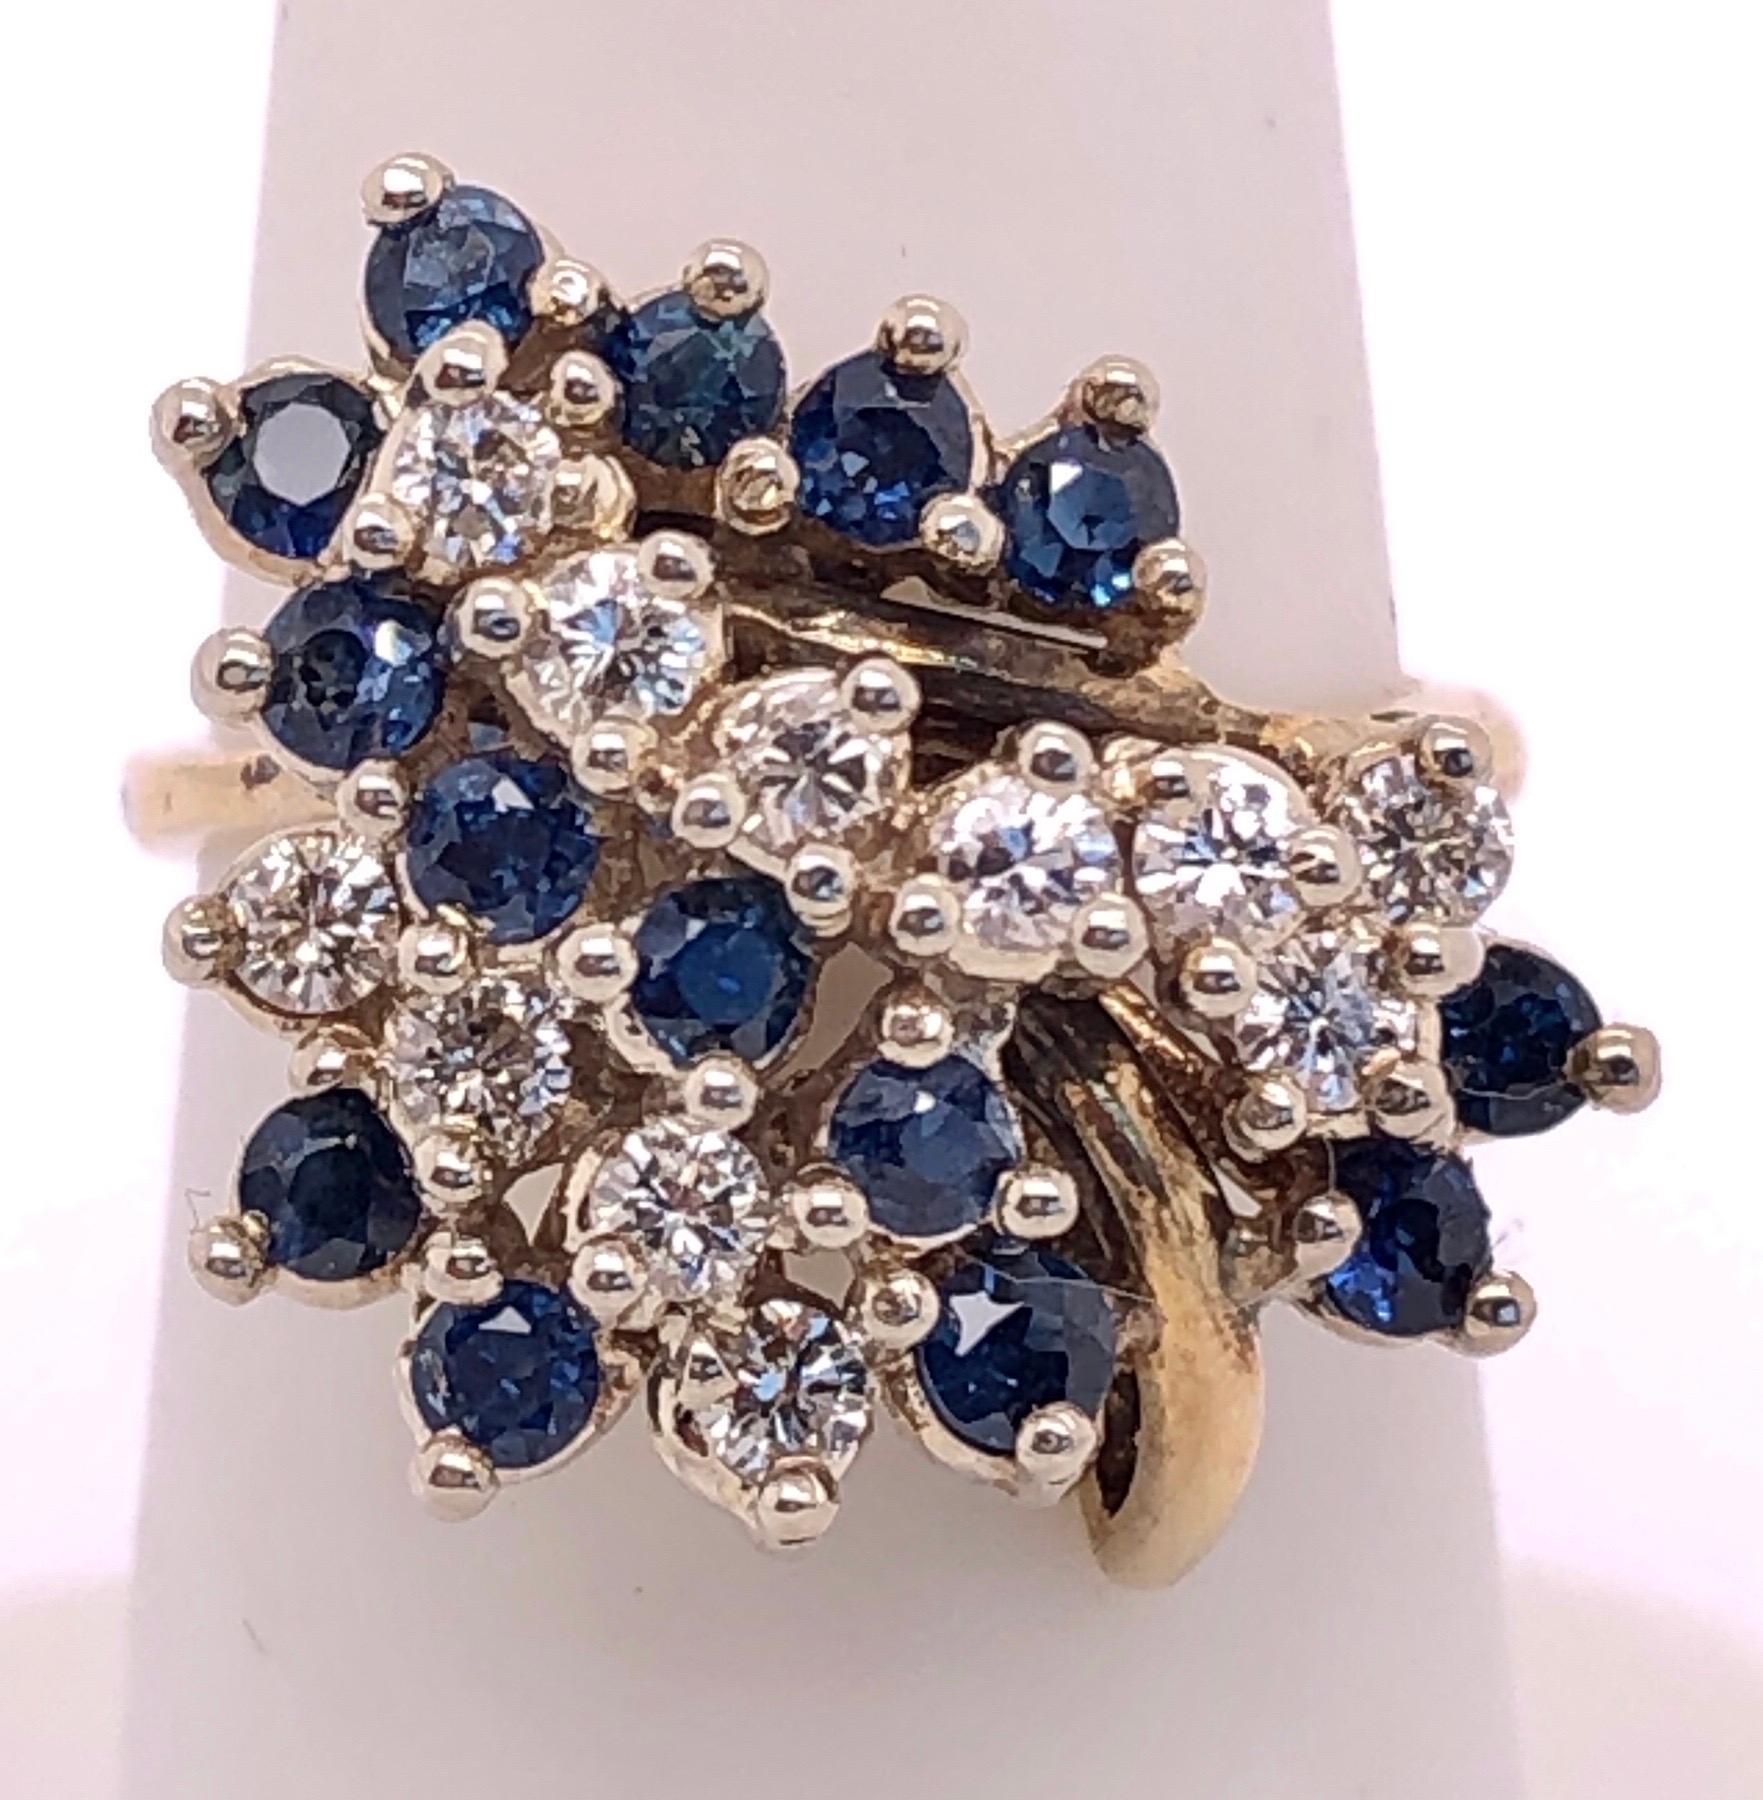 14 Karat Yellow Gold Ring with Sapphire and Diamond Cluster
0.80 total diamond weight.
14 piece round sapphire
Size 6
7 grams total weight.
